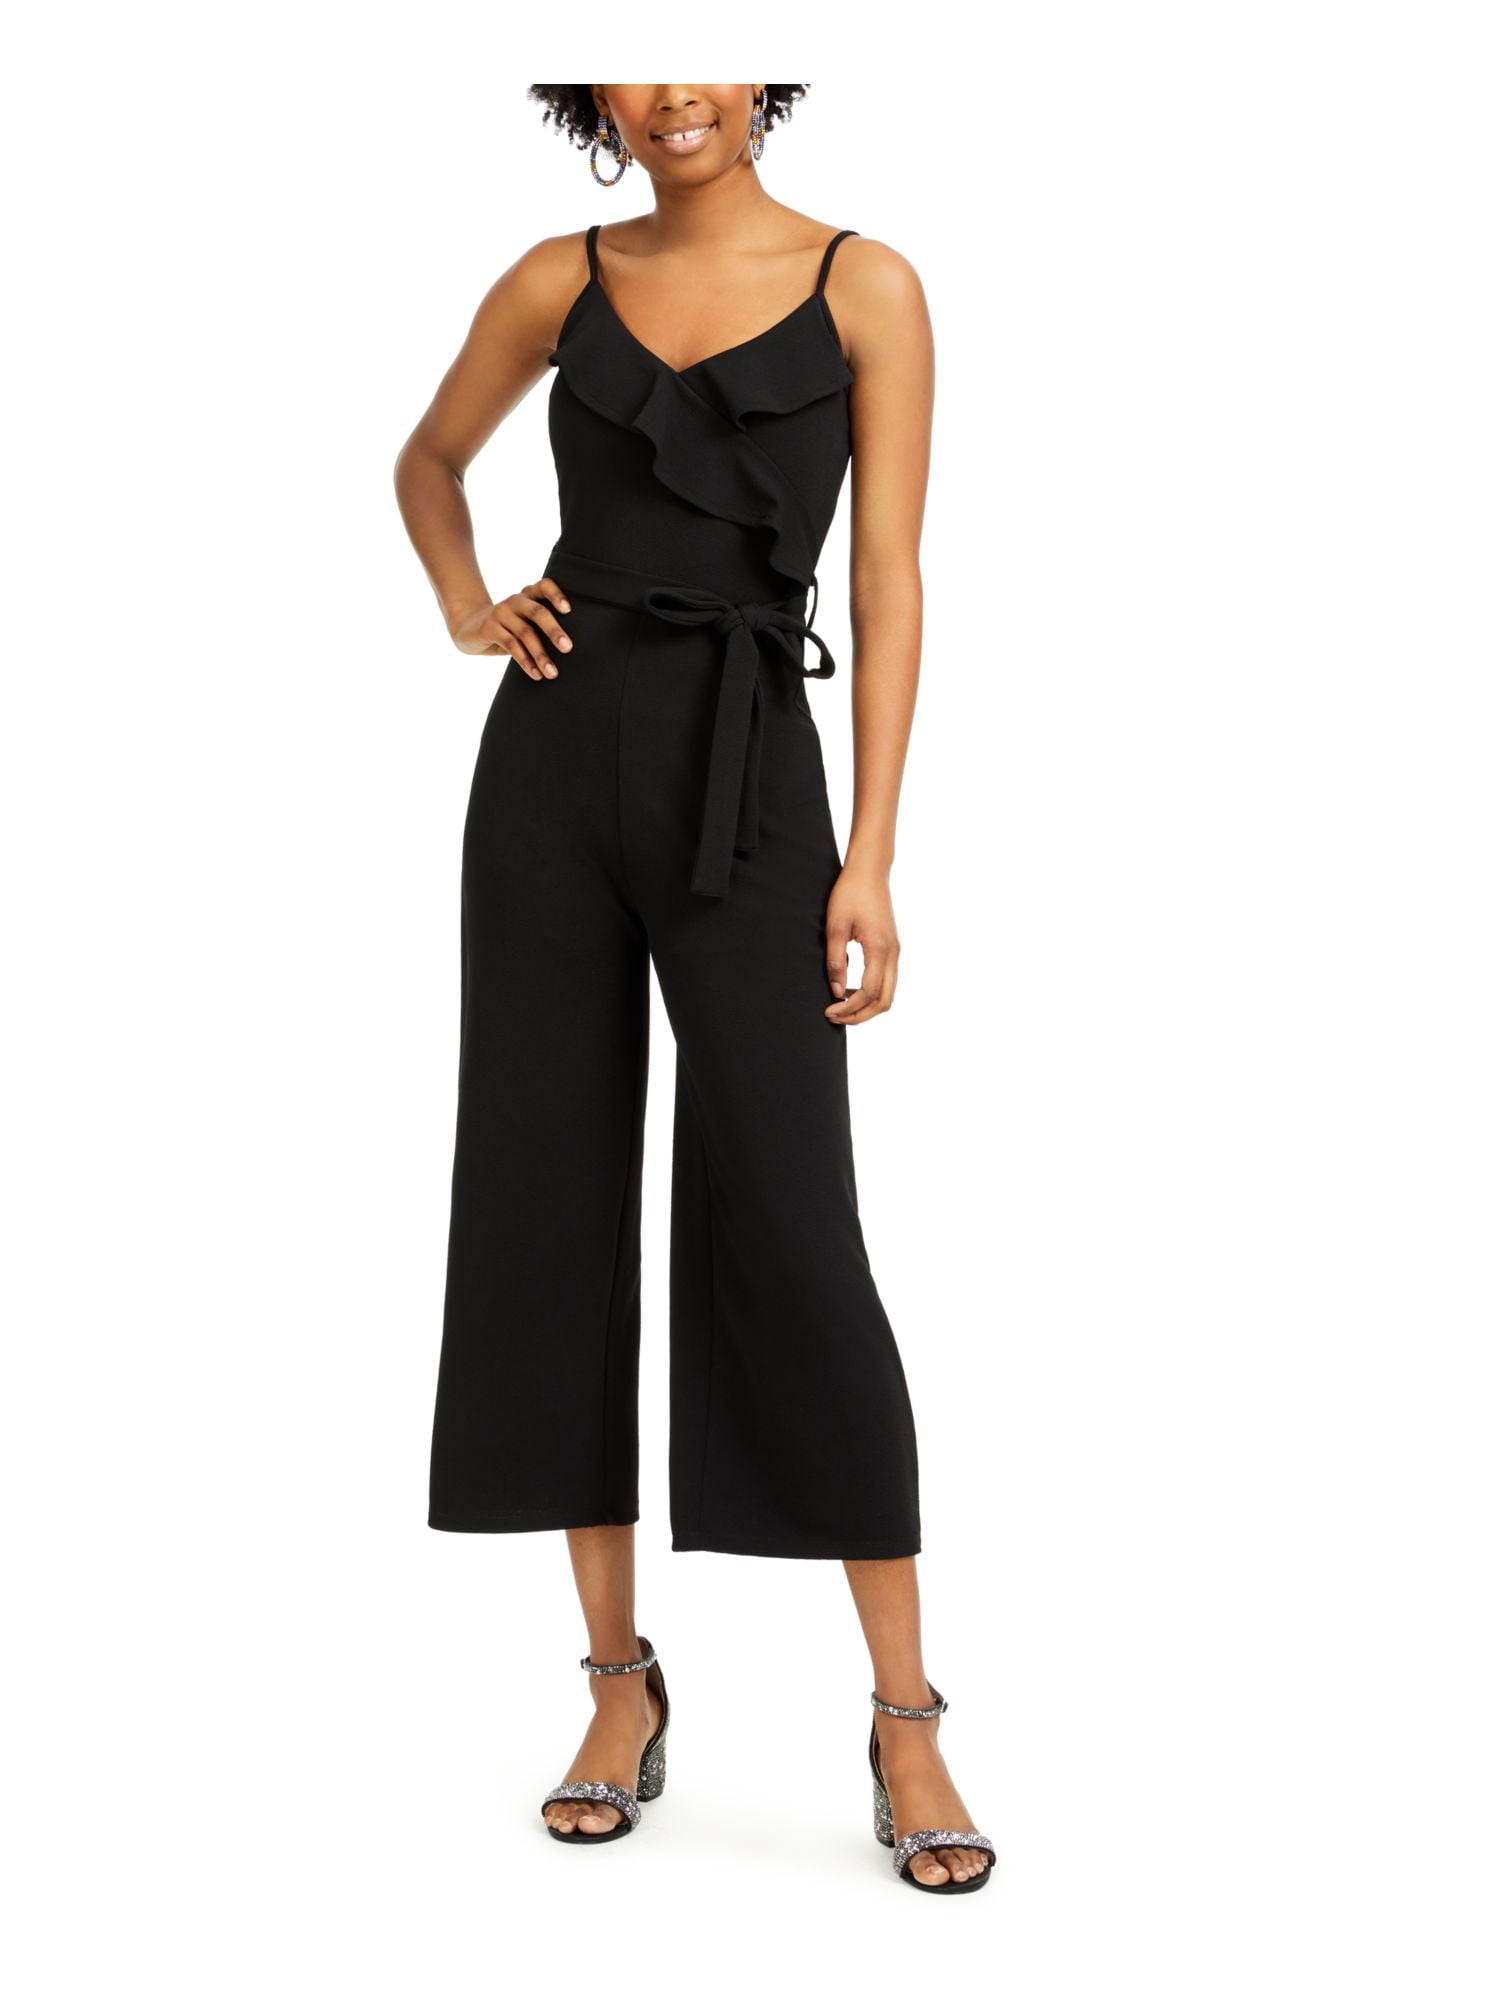 CRAVE FAME Womens Black Ruffled Tie Cropped Spaghetti Strap V Neck Cocktail  Wide Leg Jumpsuit Juniors M 